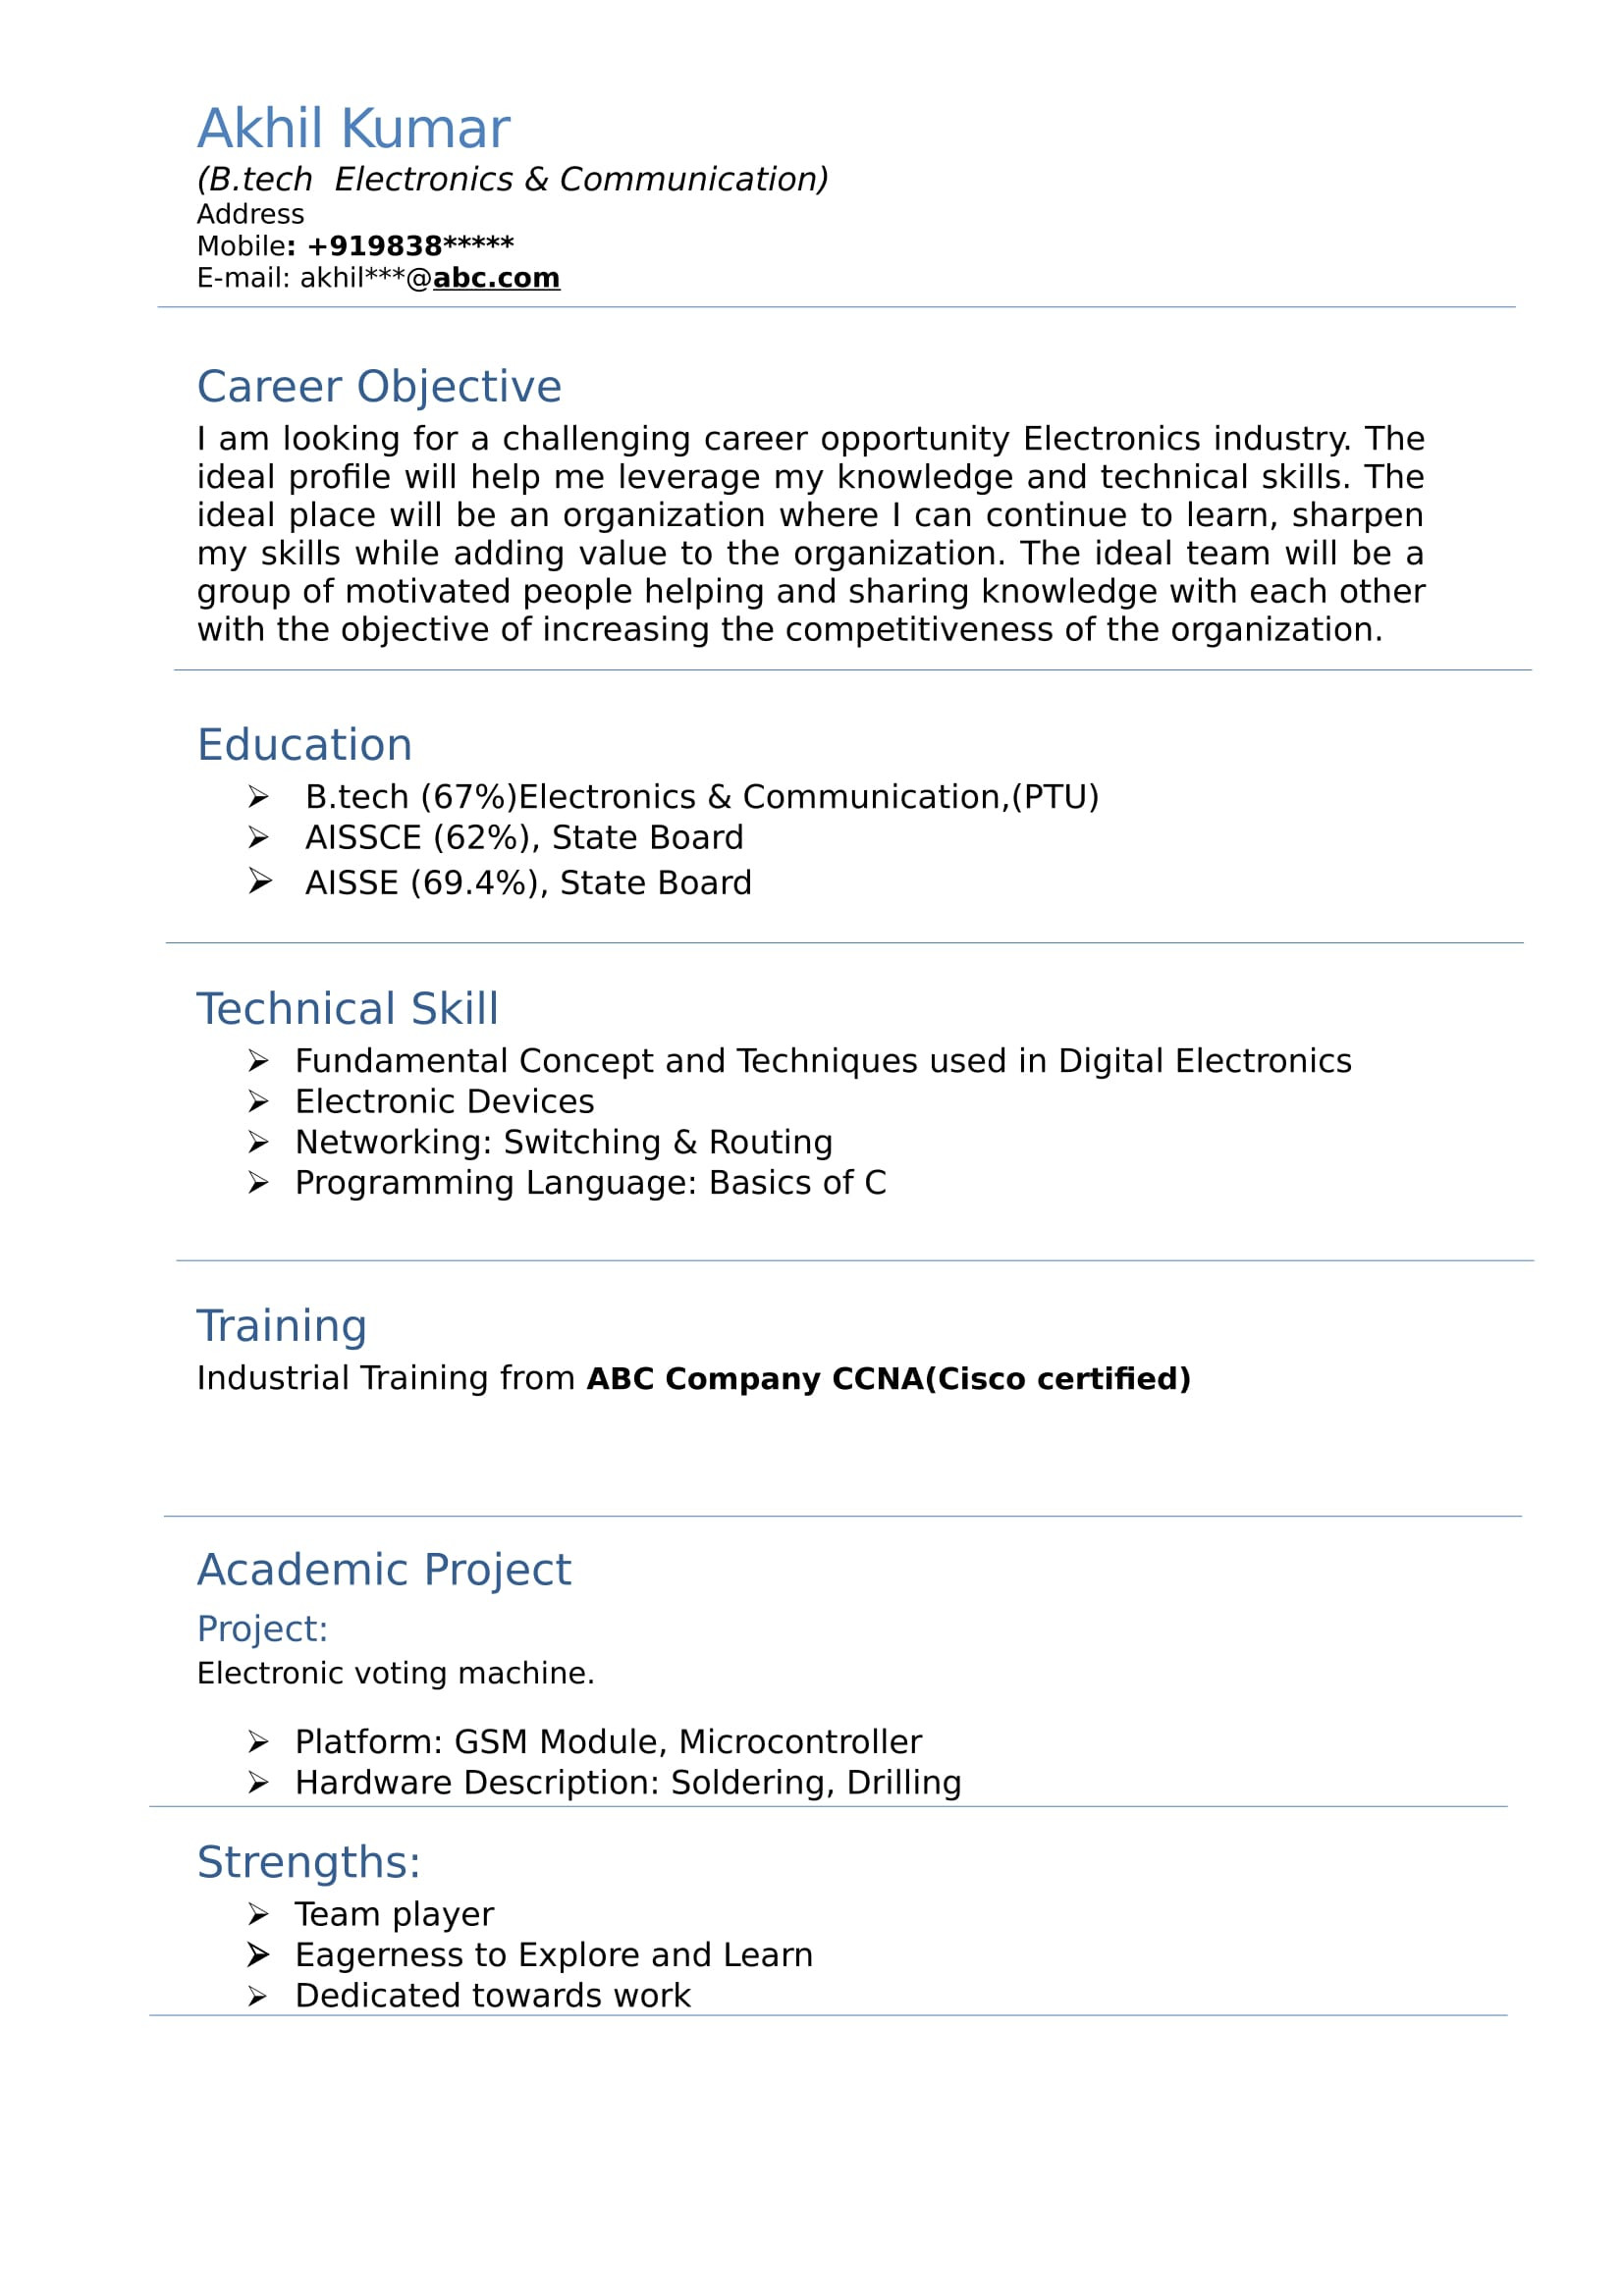 Resume Samples for Electronics and Communication Engineers Communications Engineer Cv October 2021